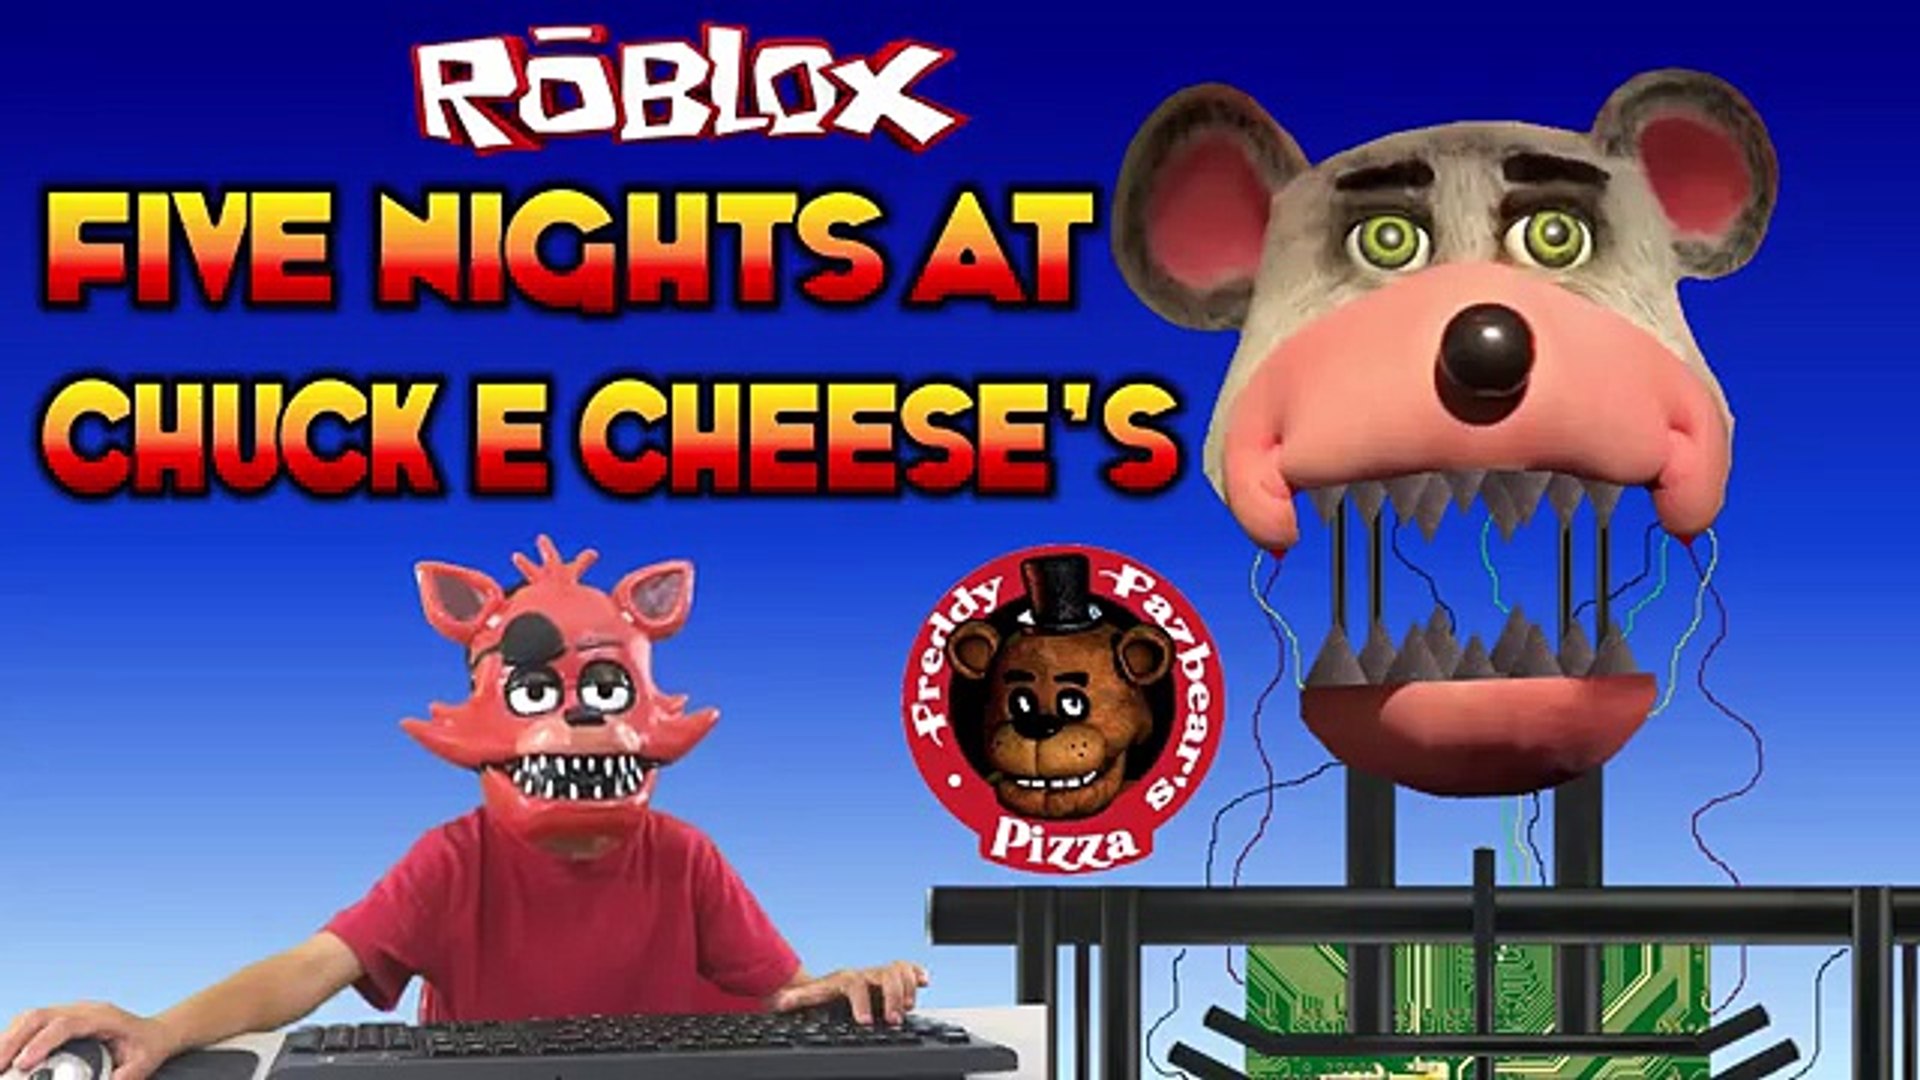 Five Nights At Freddys At Chuck E Cheese Jayden Plays Roblox Game